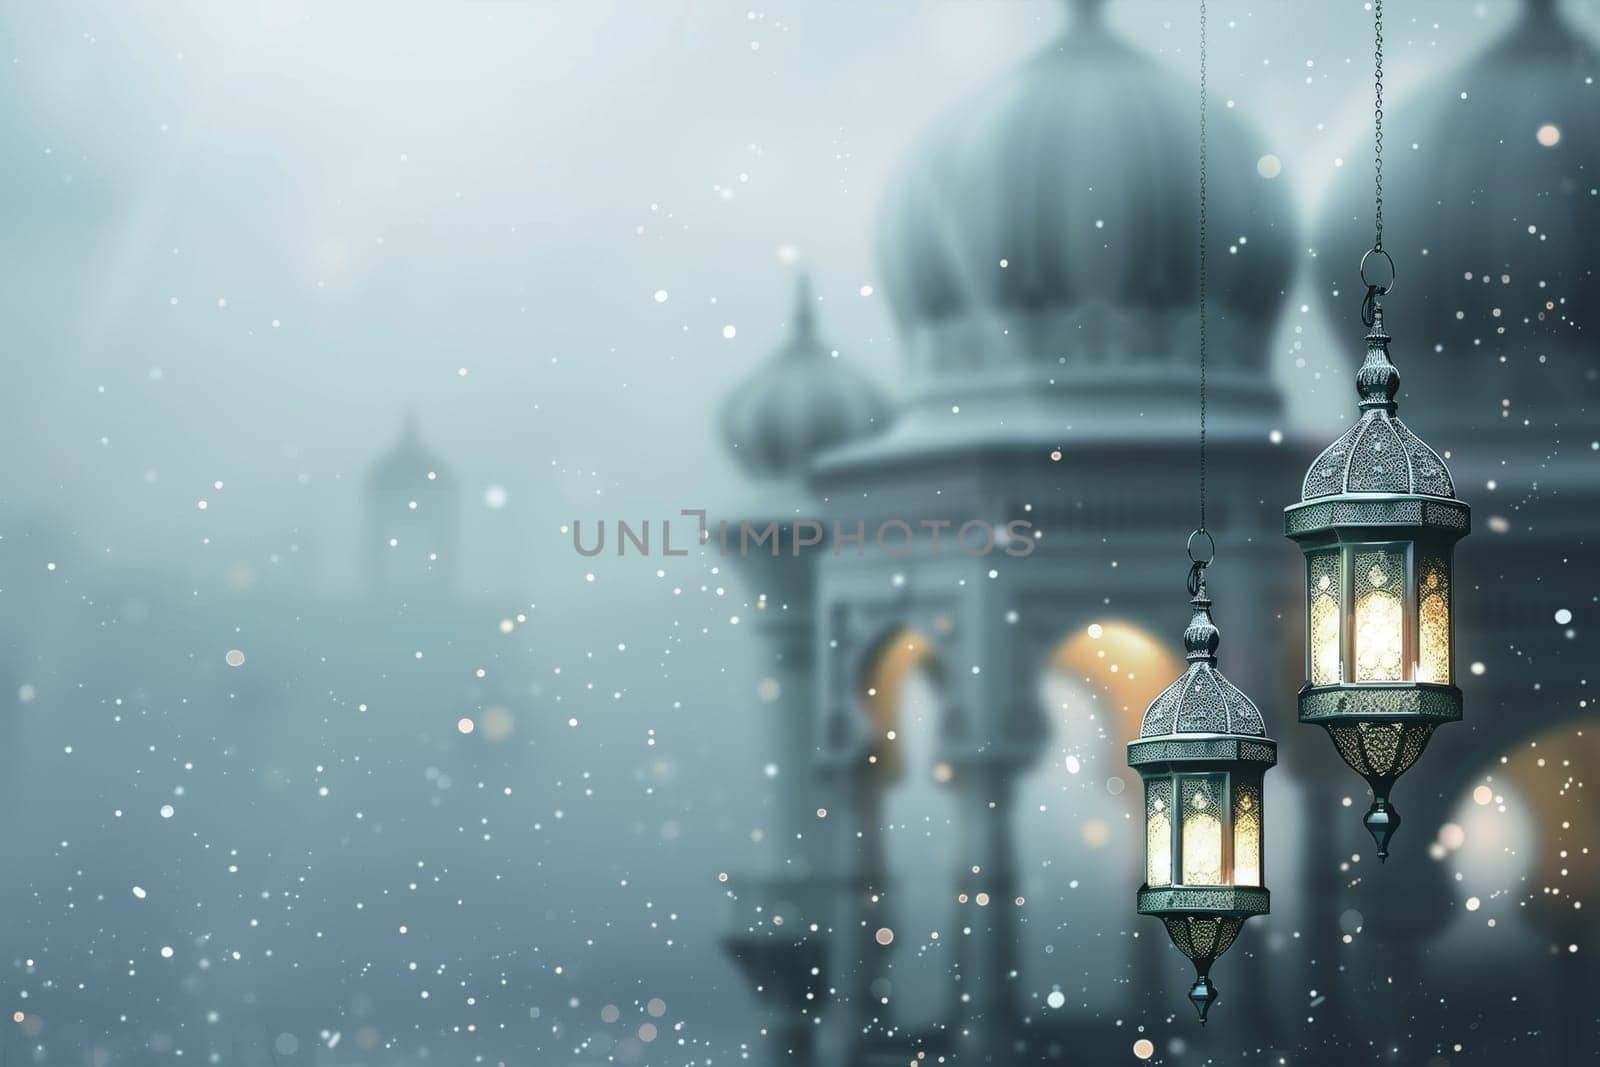 Serene Evening at a Mosque With Illuminated Lanterns Amidst Falling Snowflakes by Sd28DimoN_1976